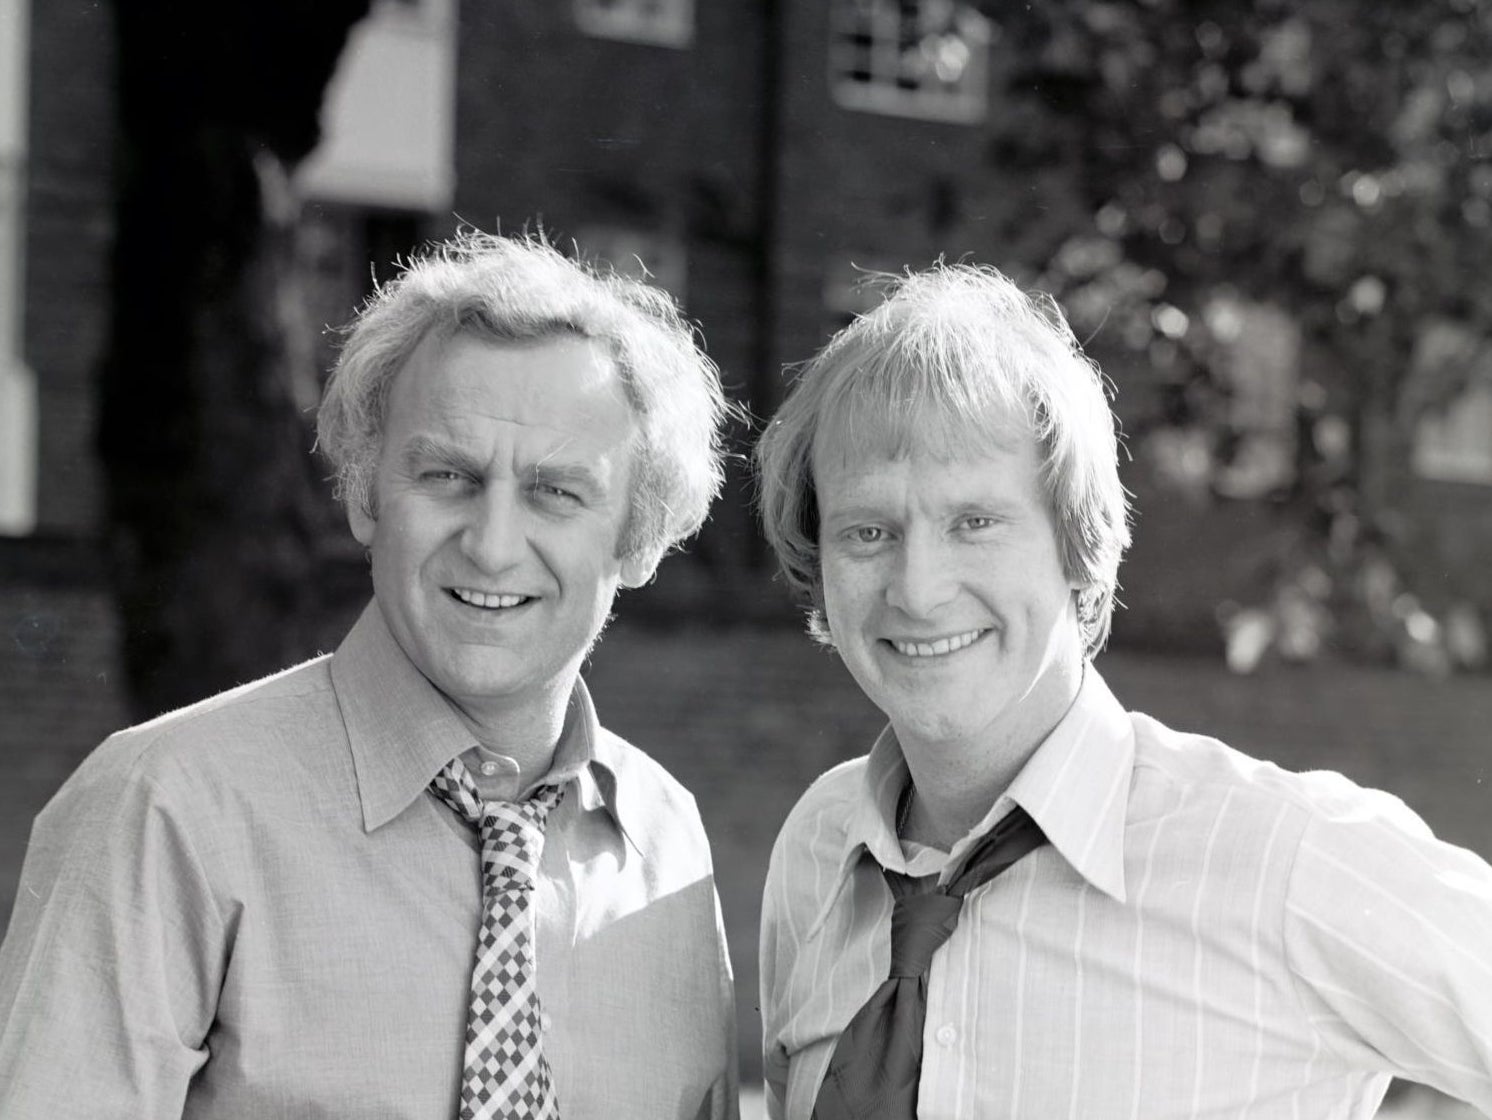 John Thaw and Dennis Waterman in police series ‘The Sweeney’ in 1977